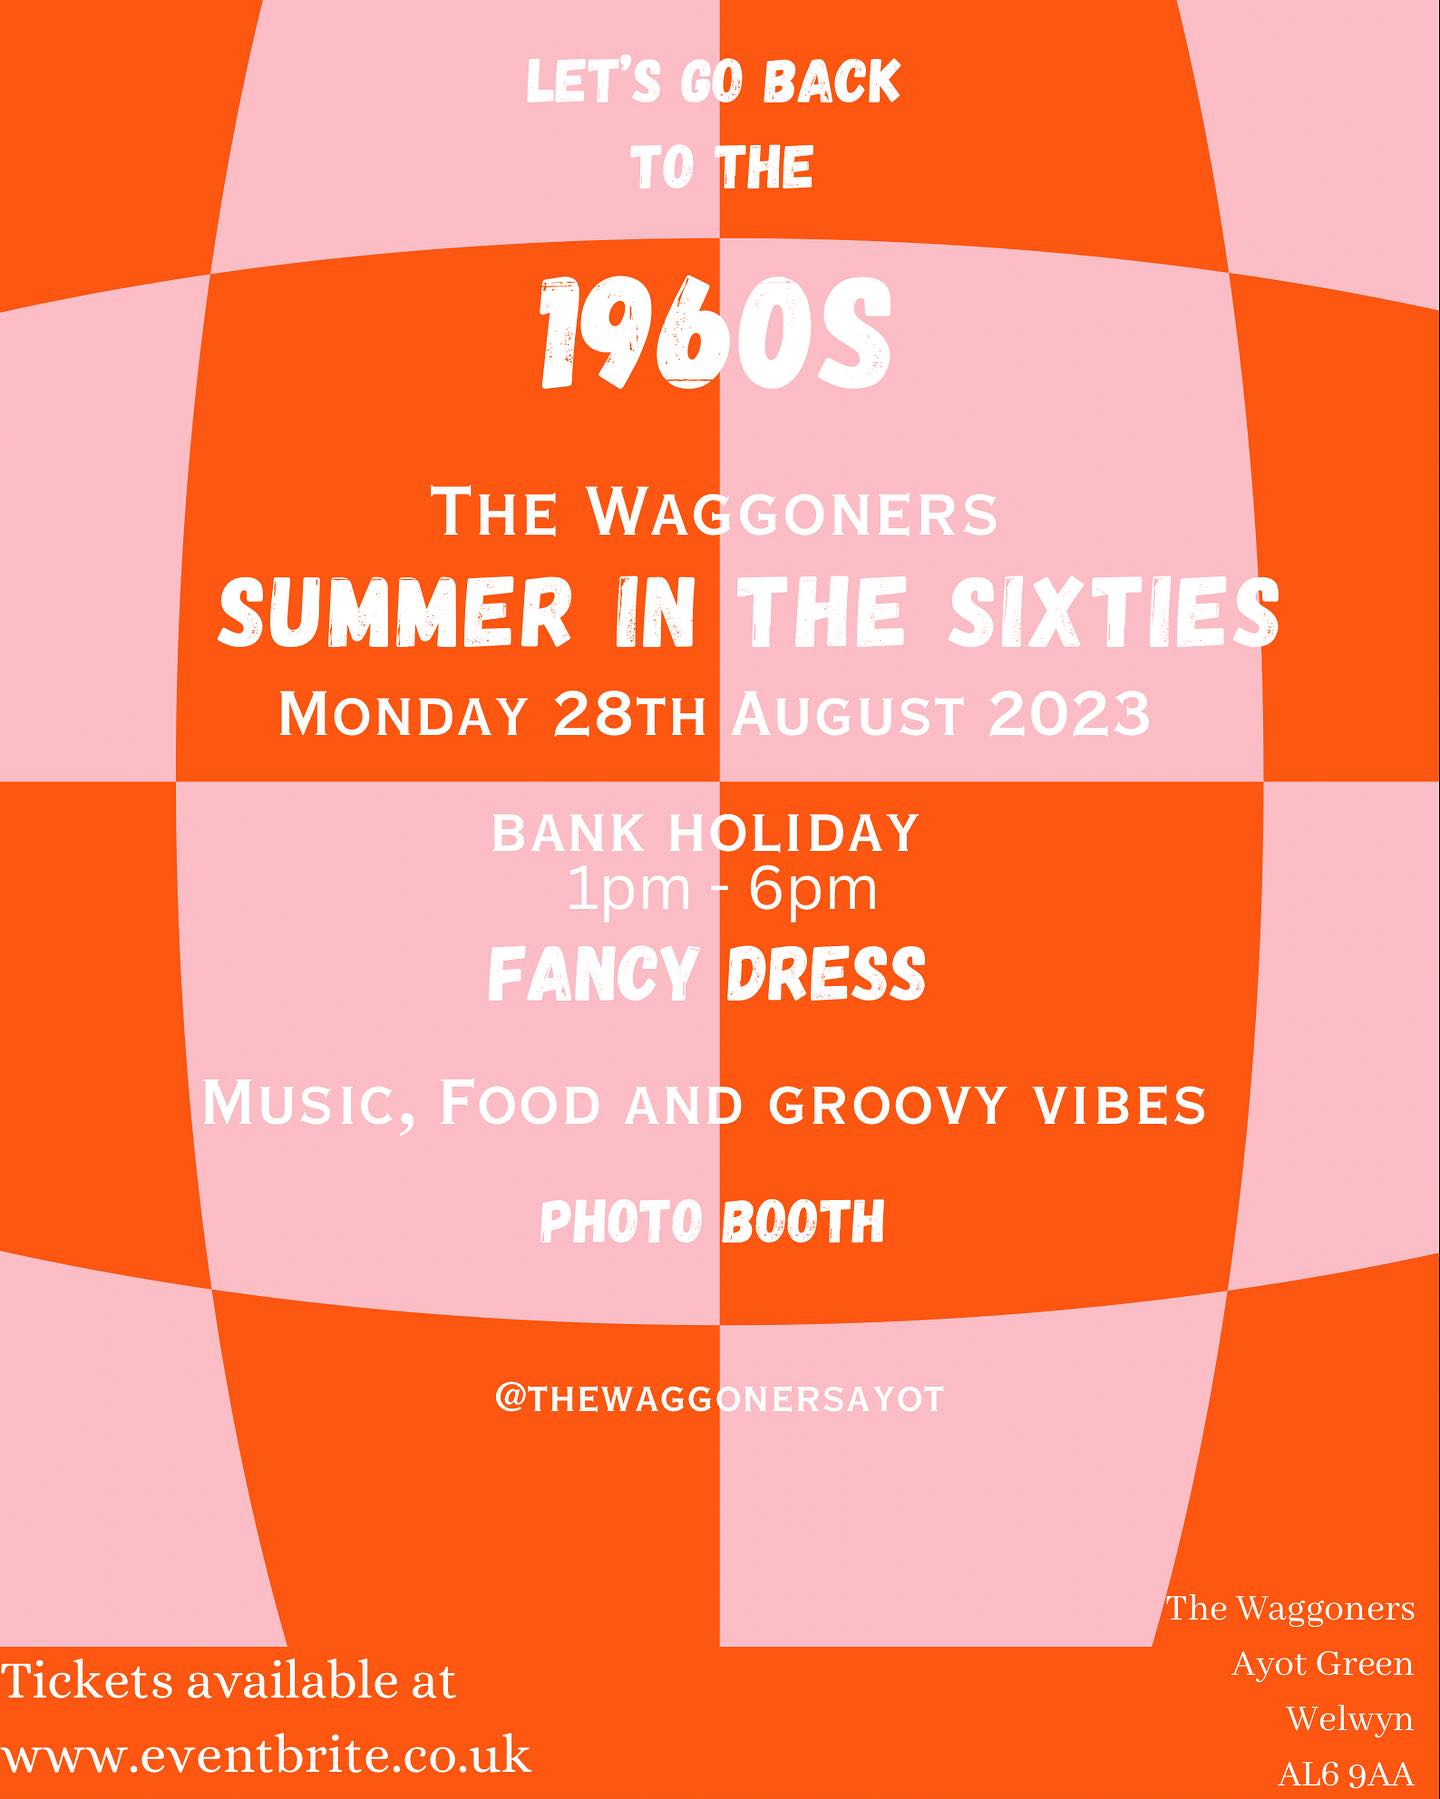 The Waggoners